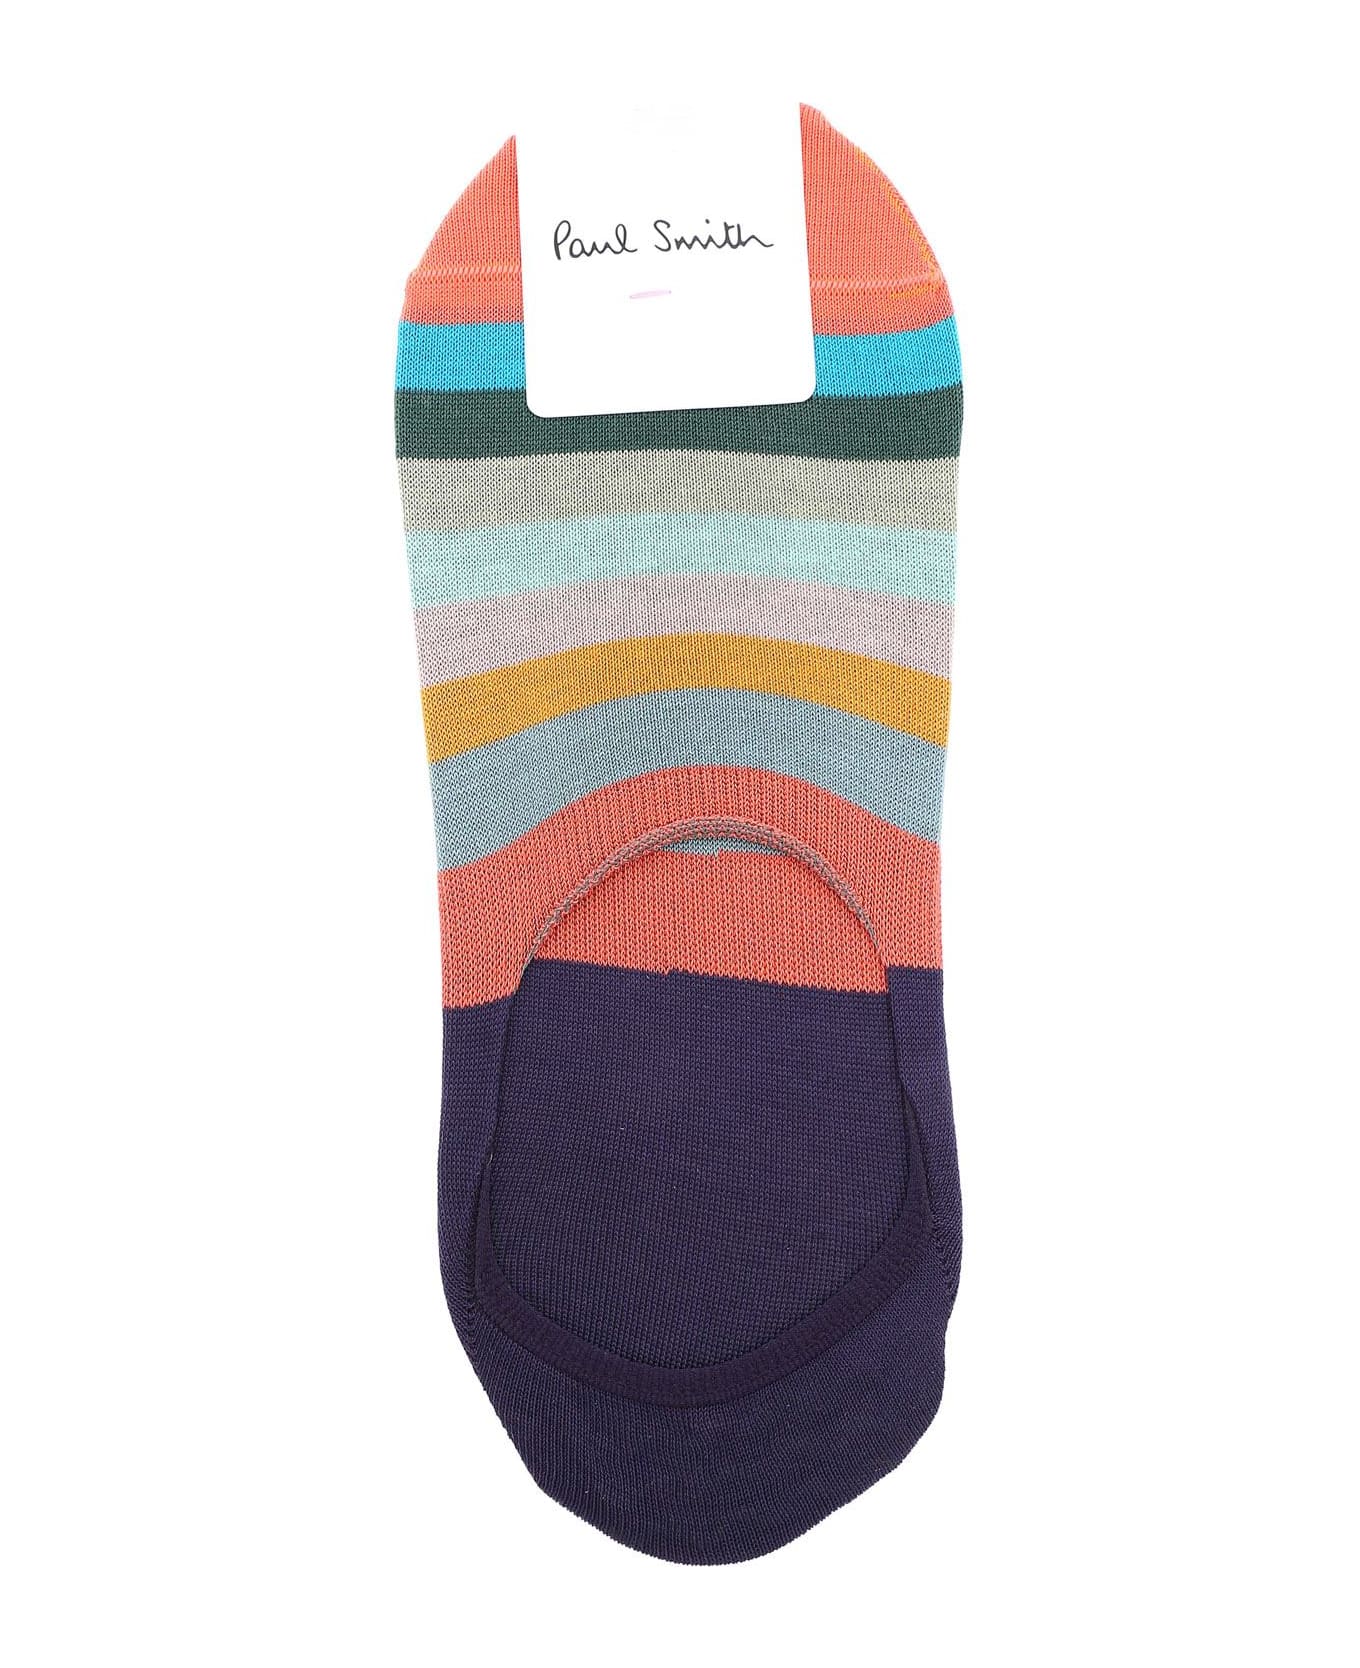 Paul Smith Foot Safety - Multicolor 靴下